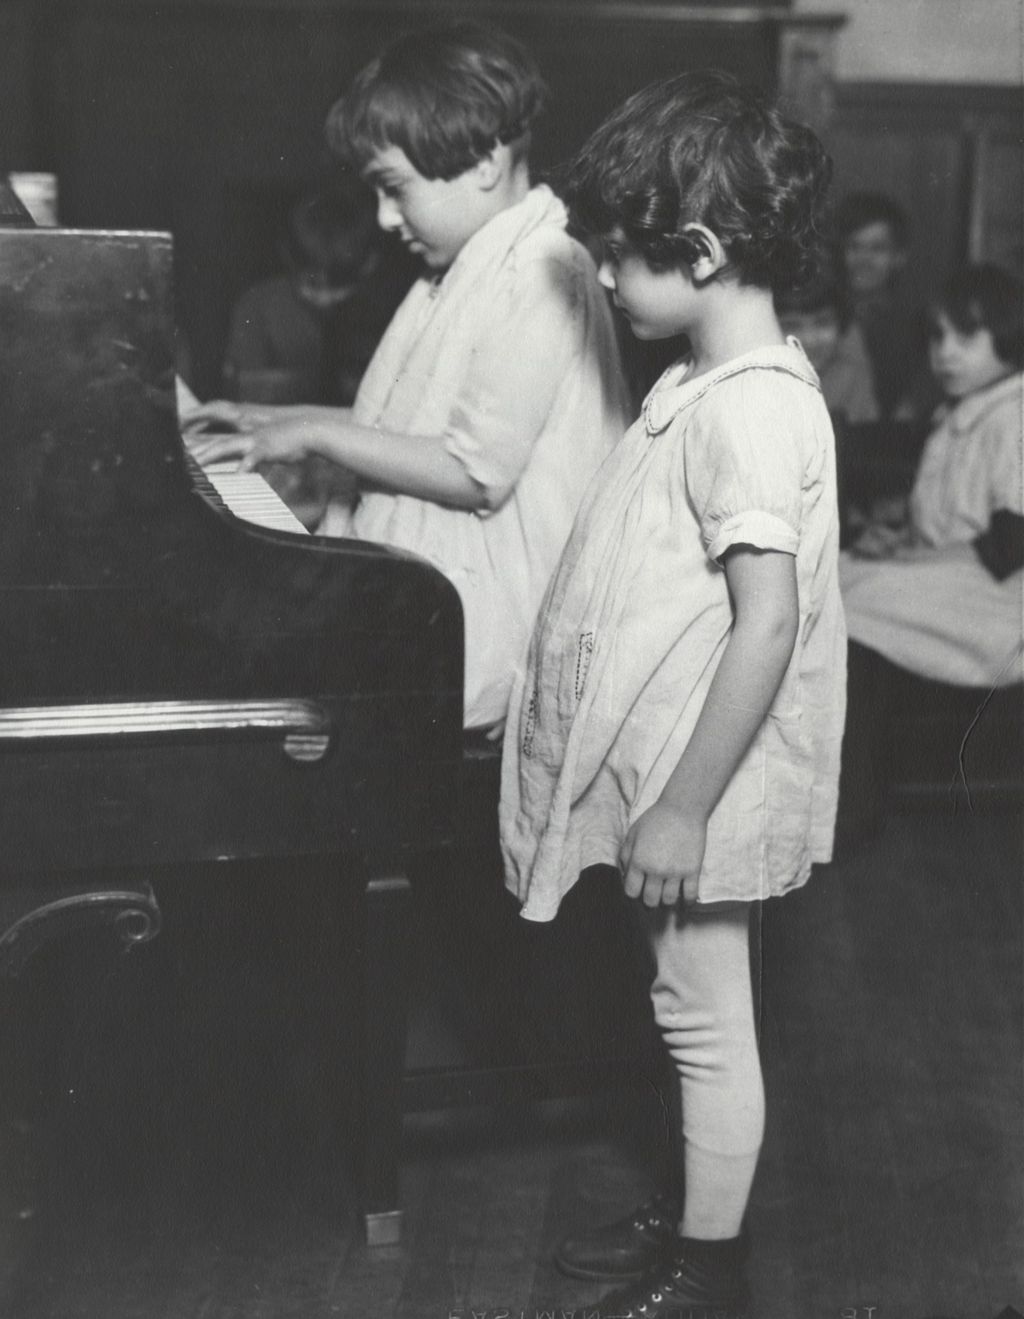 Miniature of Girl playing piano while another girl watches